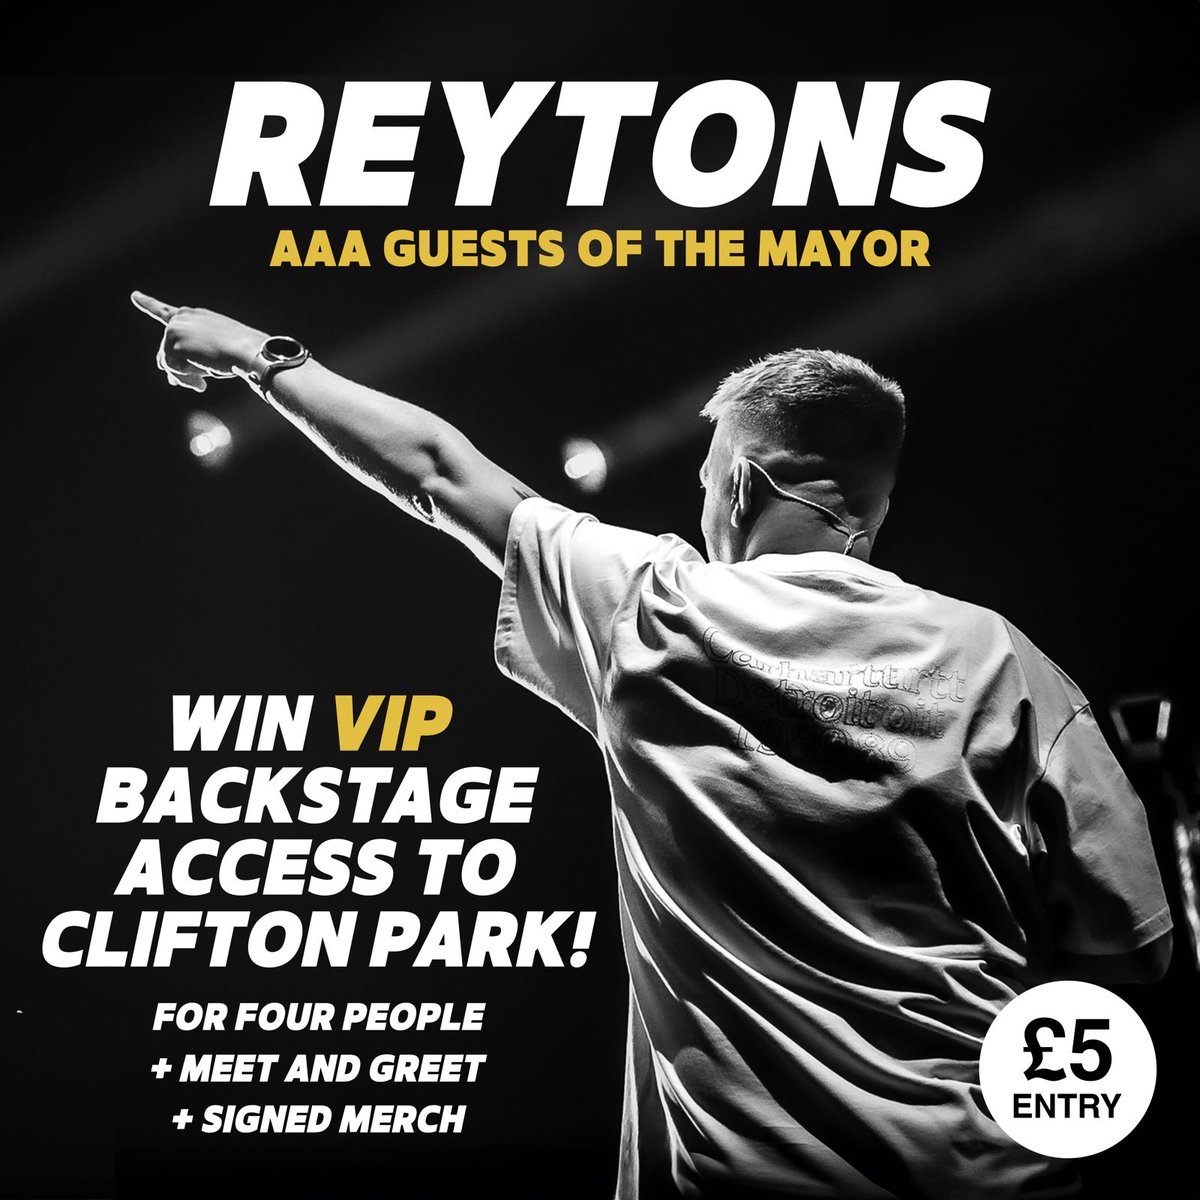 crowdfunder.co.uk/p/vip-experien… @TheReytons